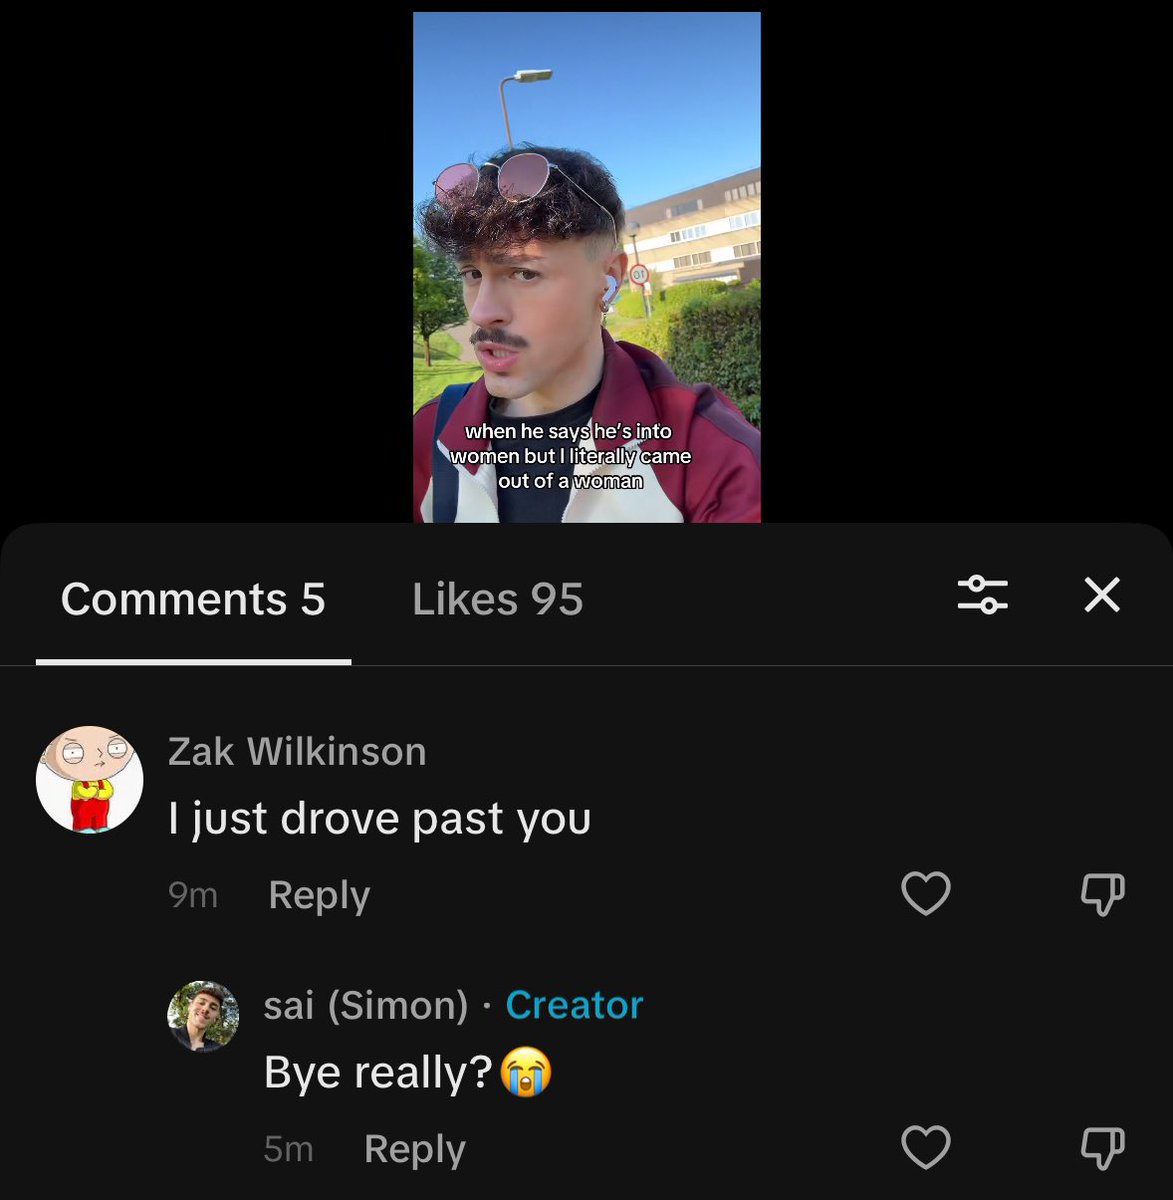 someone just saw me make a TikTok in public and then commented on it when I posted it 😭😭😭